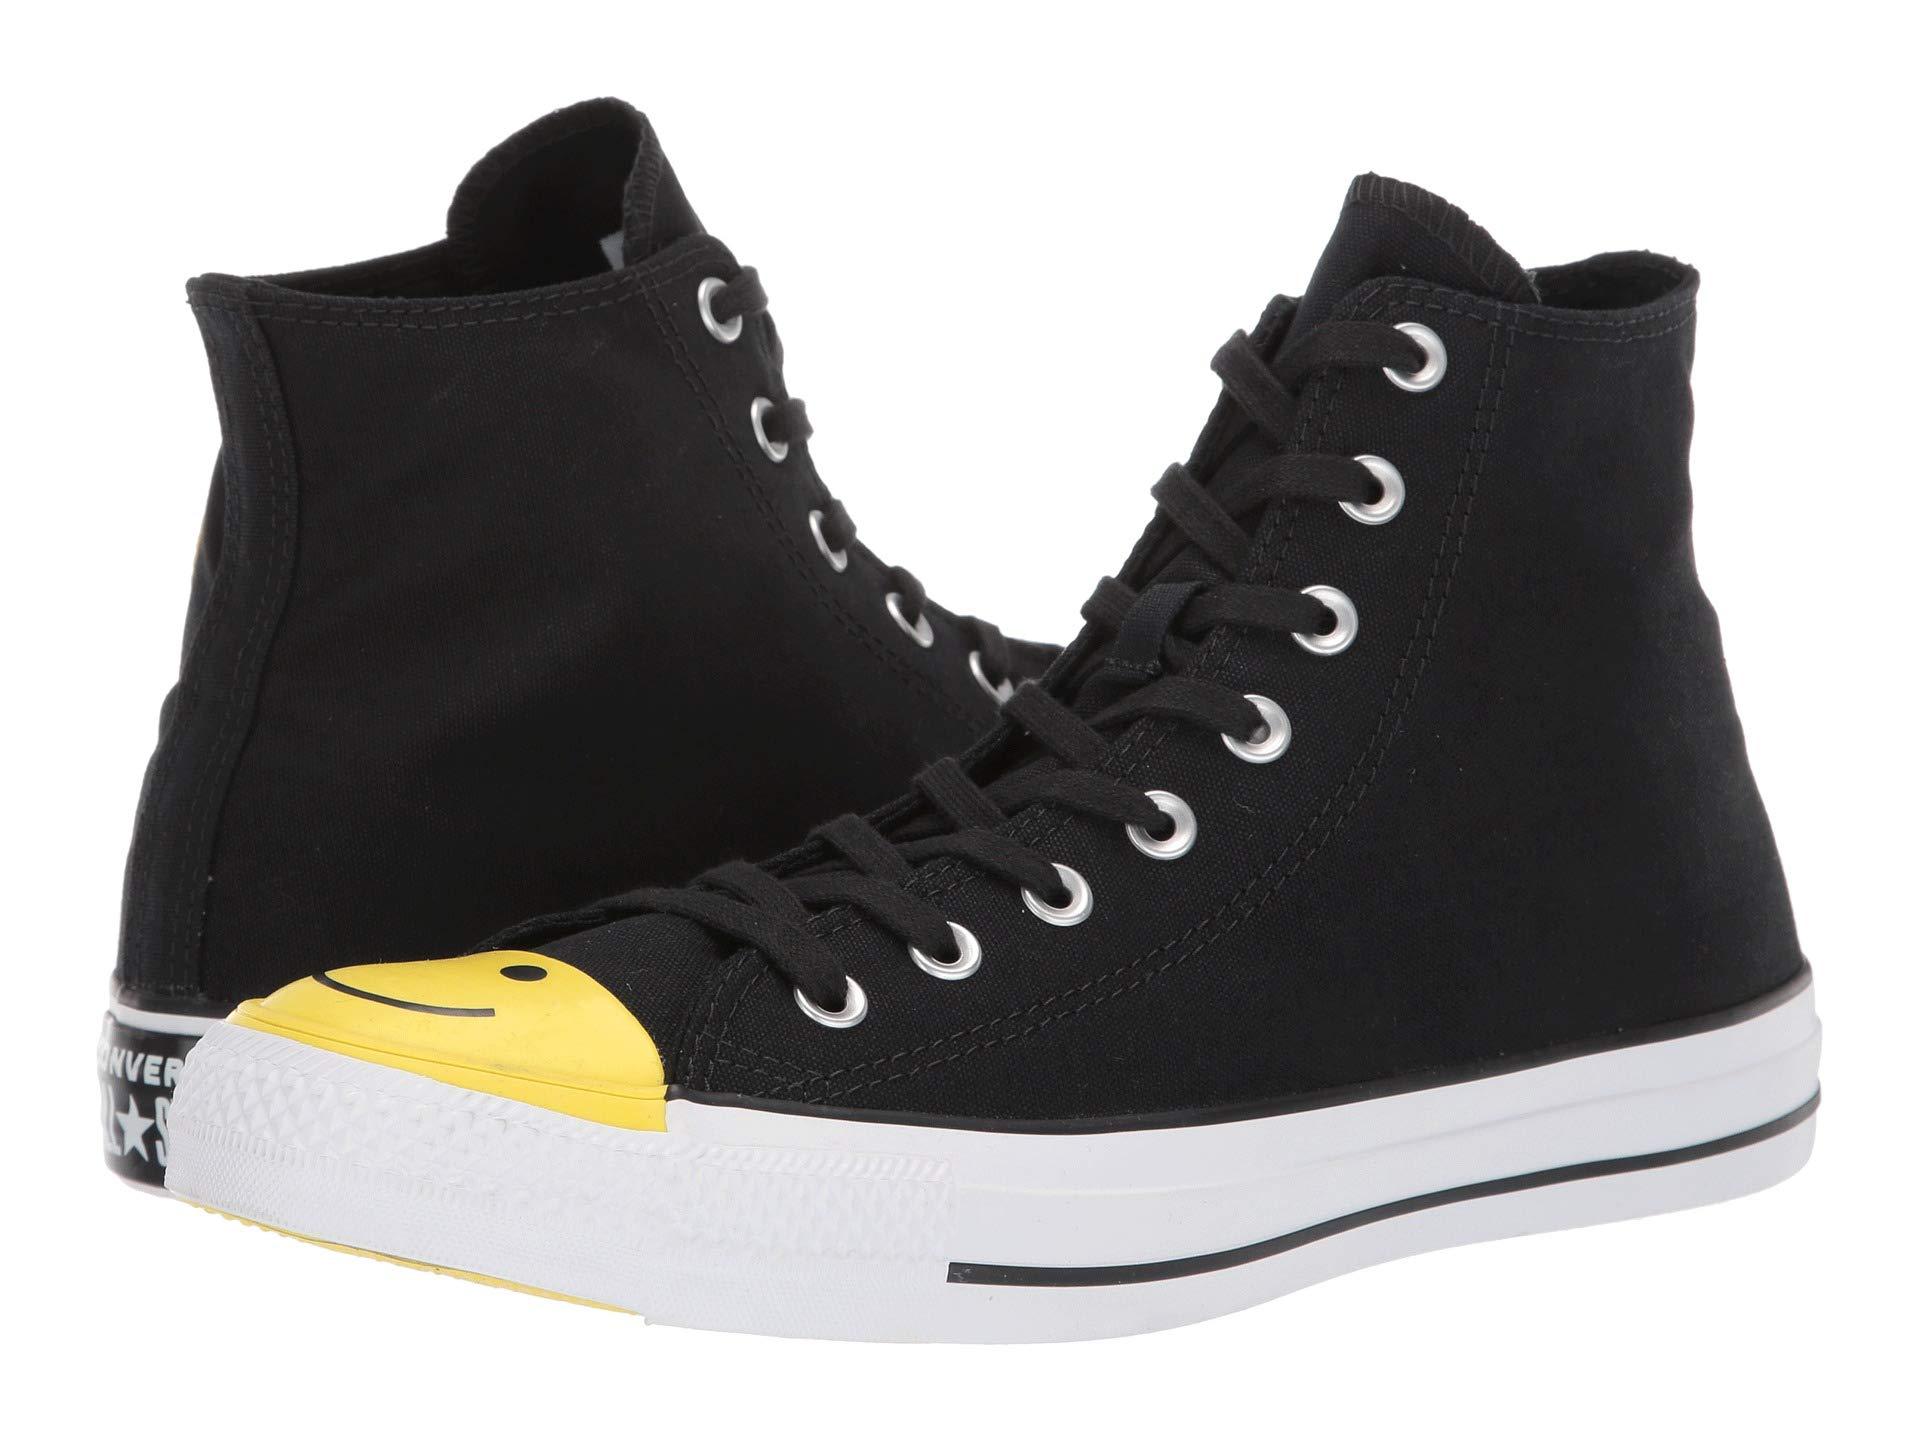 chuck taylor all star carnival colorblock high top